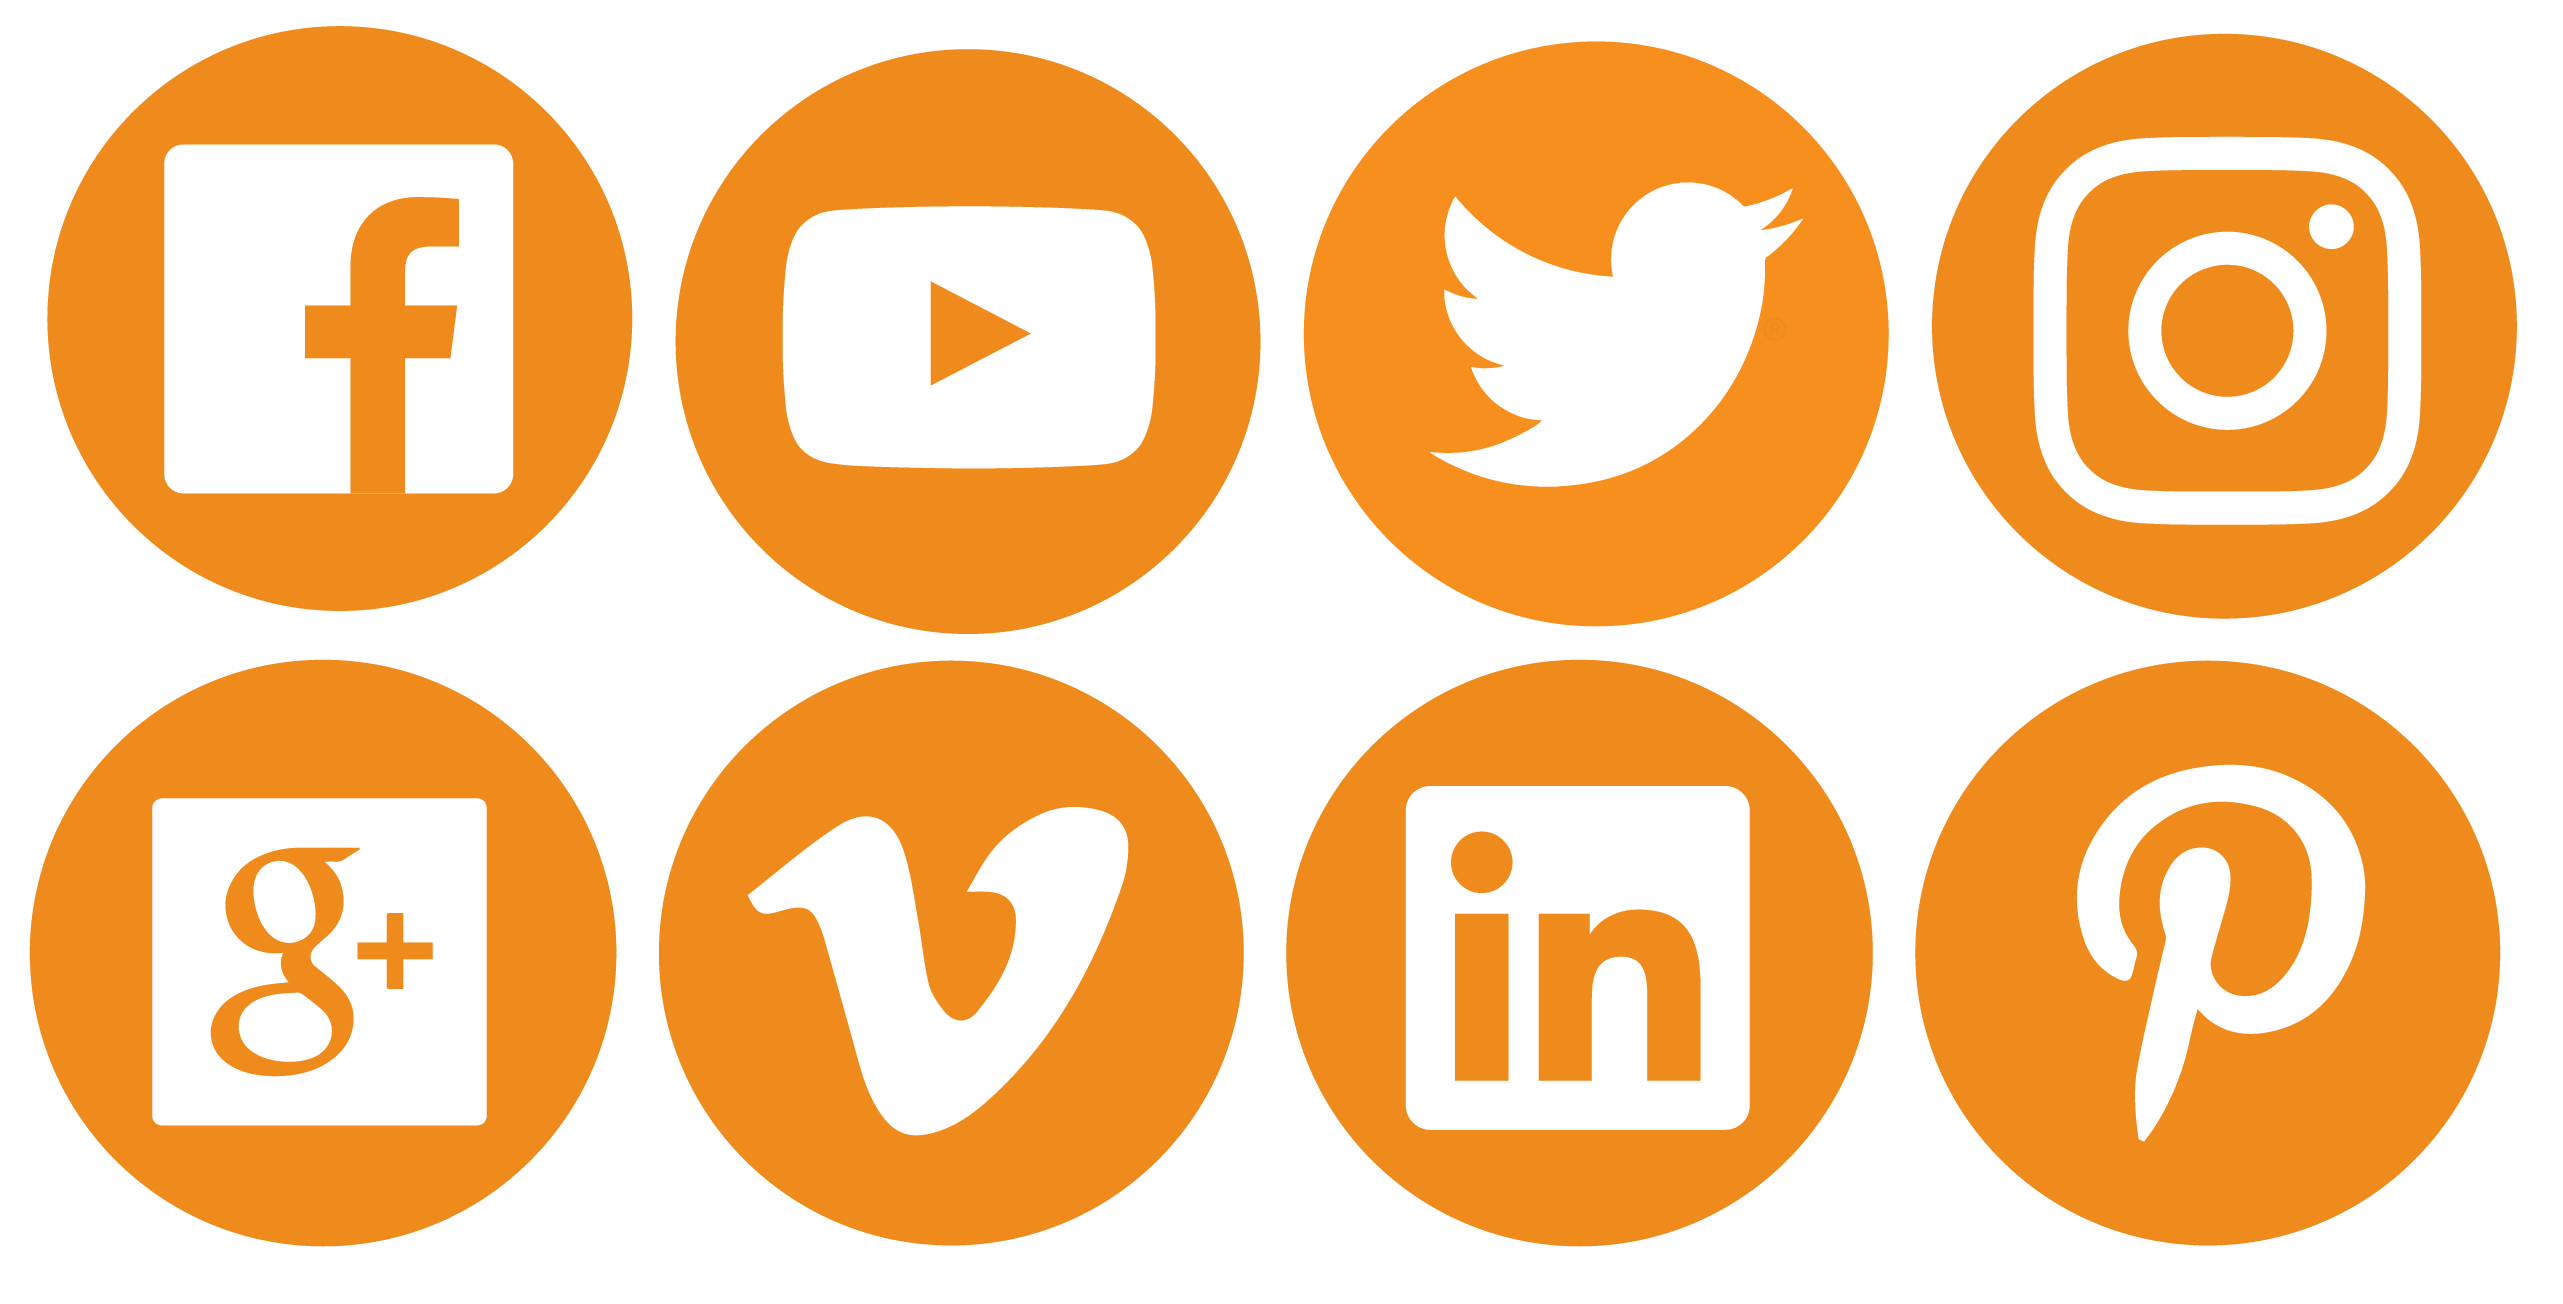 Social Media Icons PNG Transparent Social Media Icons.PNG Images. | PlusPNG